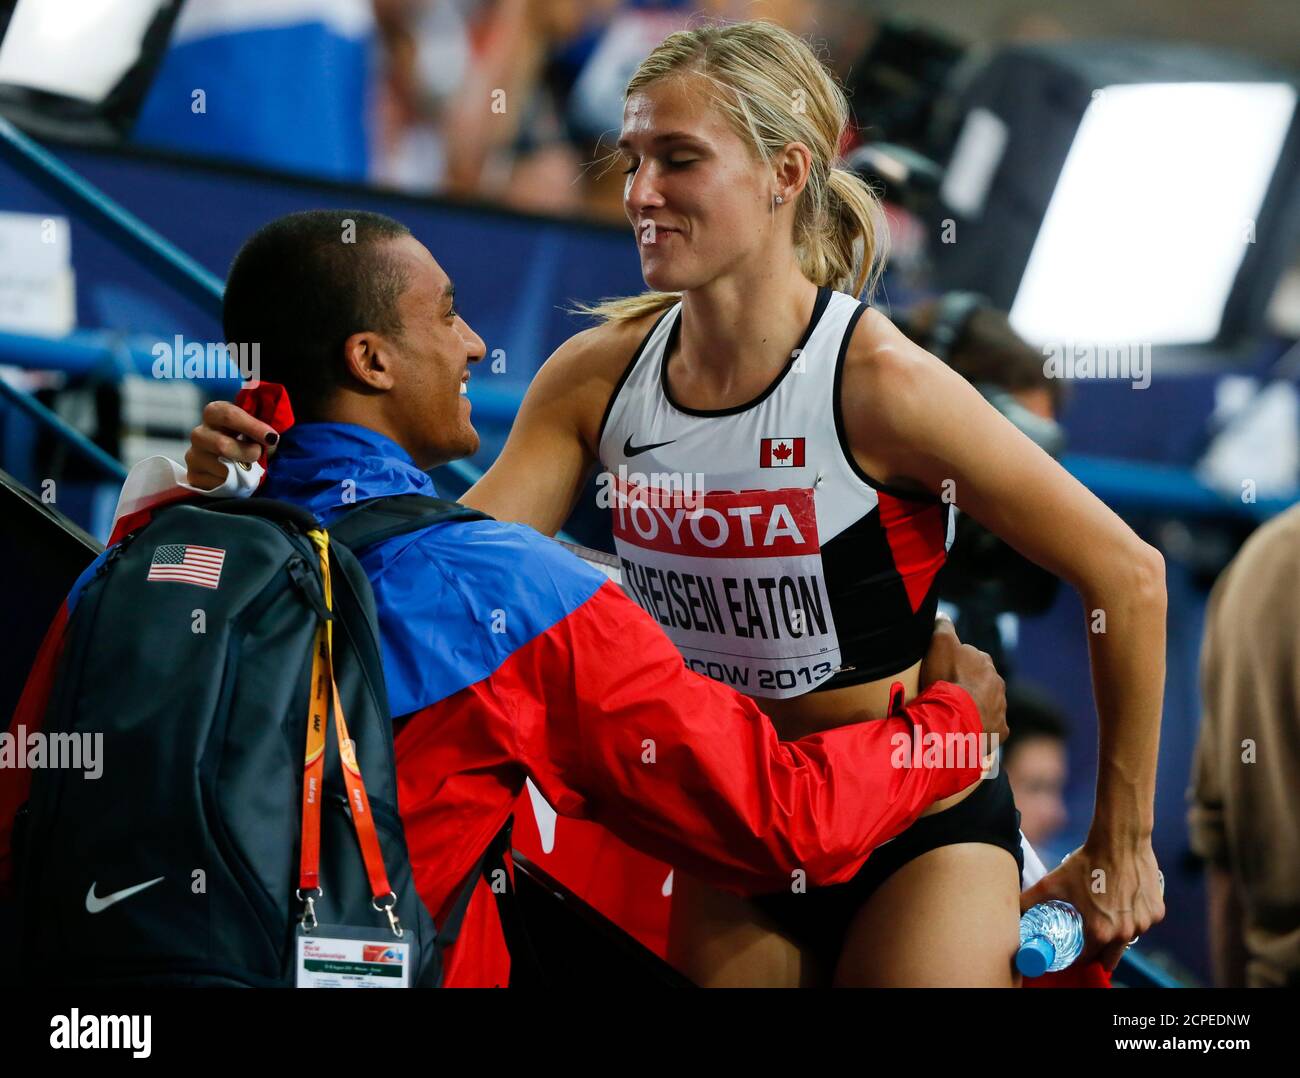 Brianne Theisen Eaton of Canada is embraced by her husband decathlon  Olympic and world champion Ashton Eaton of the U.S. after the women's  heptathlon 800 metres heat event of the IAAF World